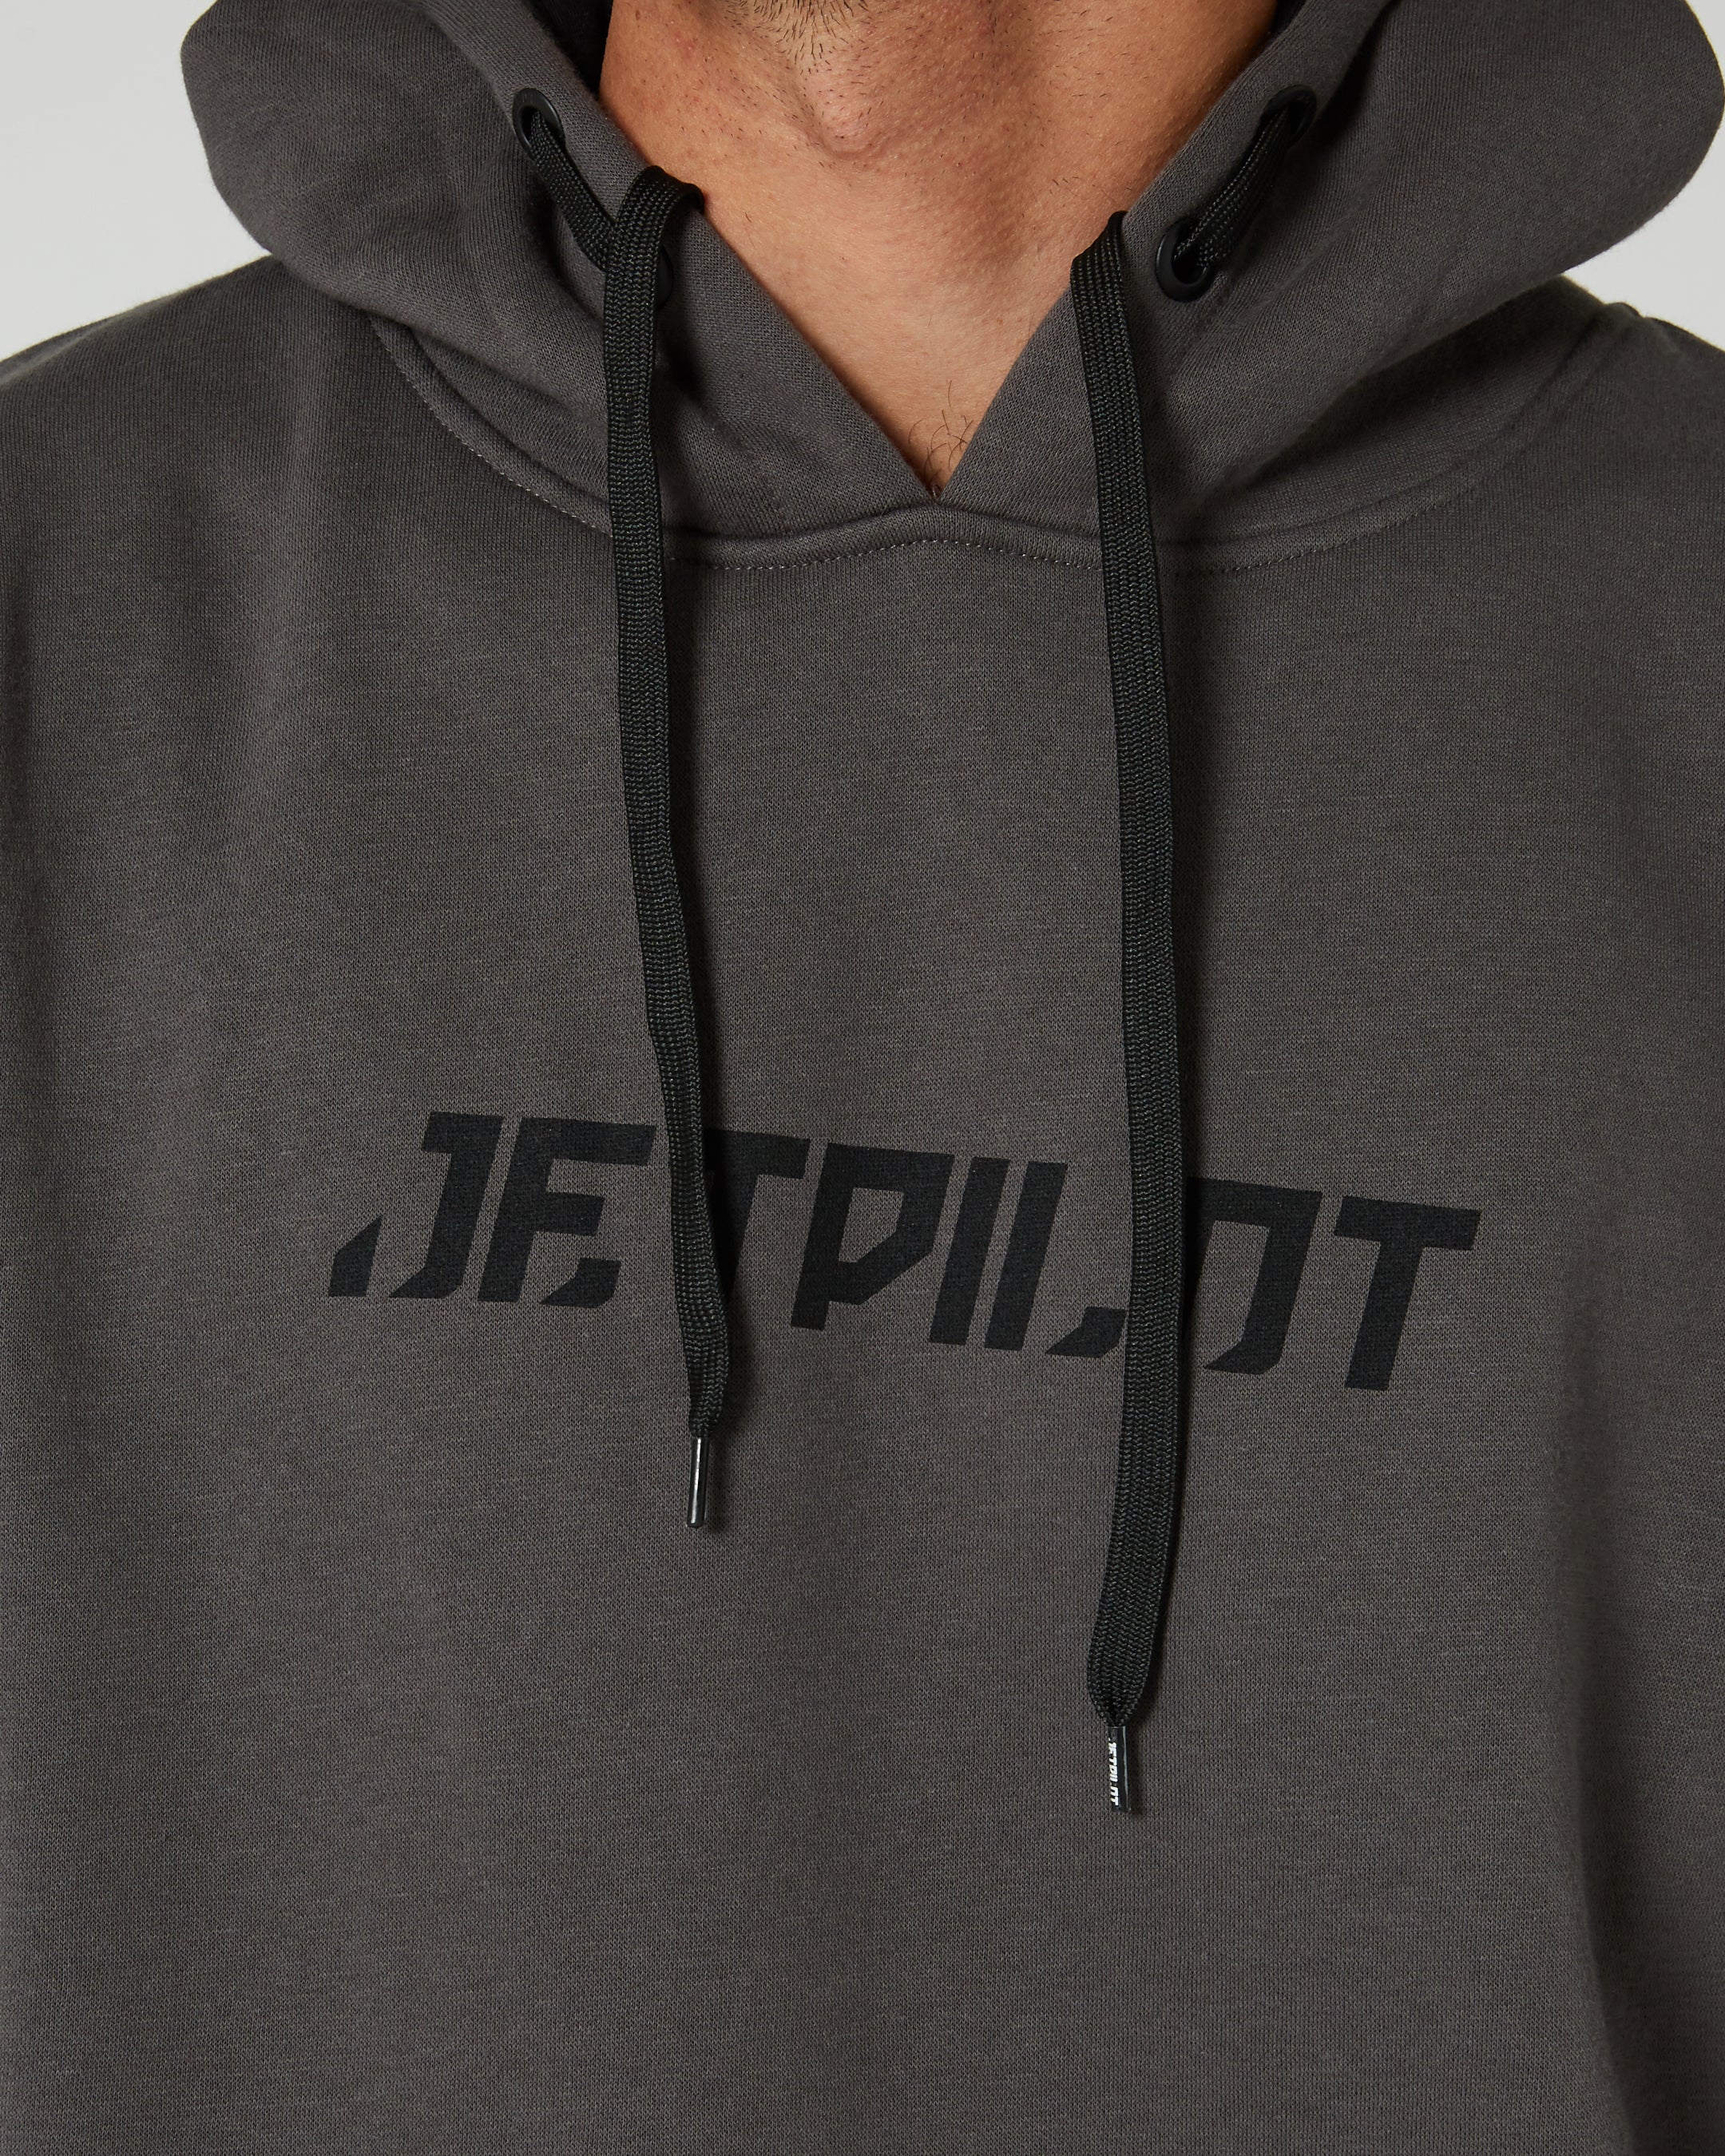 Jetpilot Cause Mens Pullover Hoodie - Charcoal 5